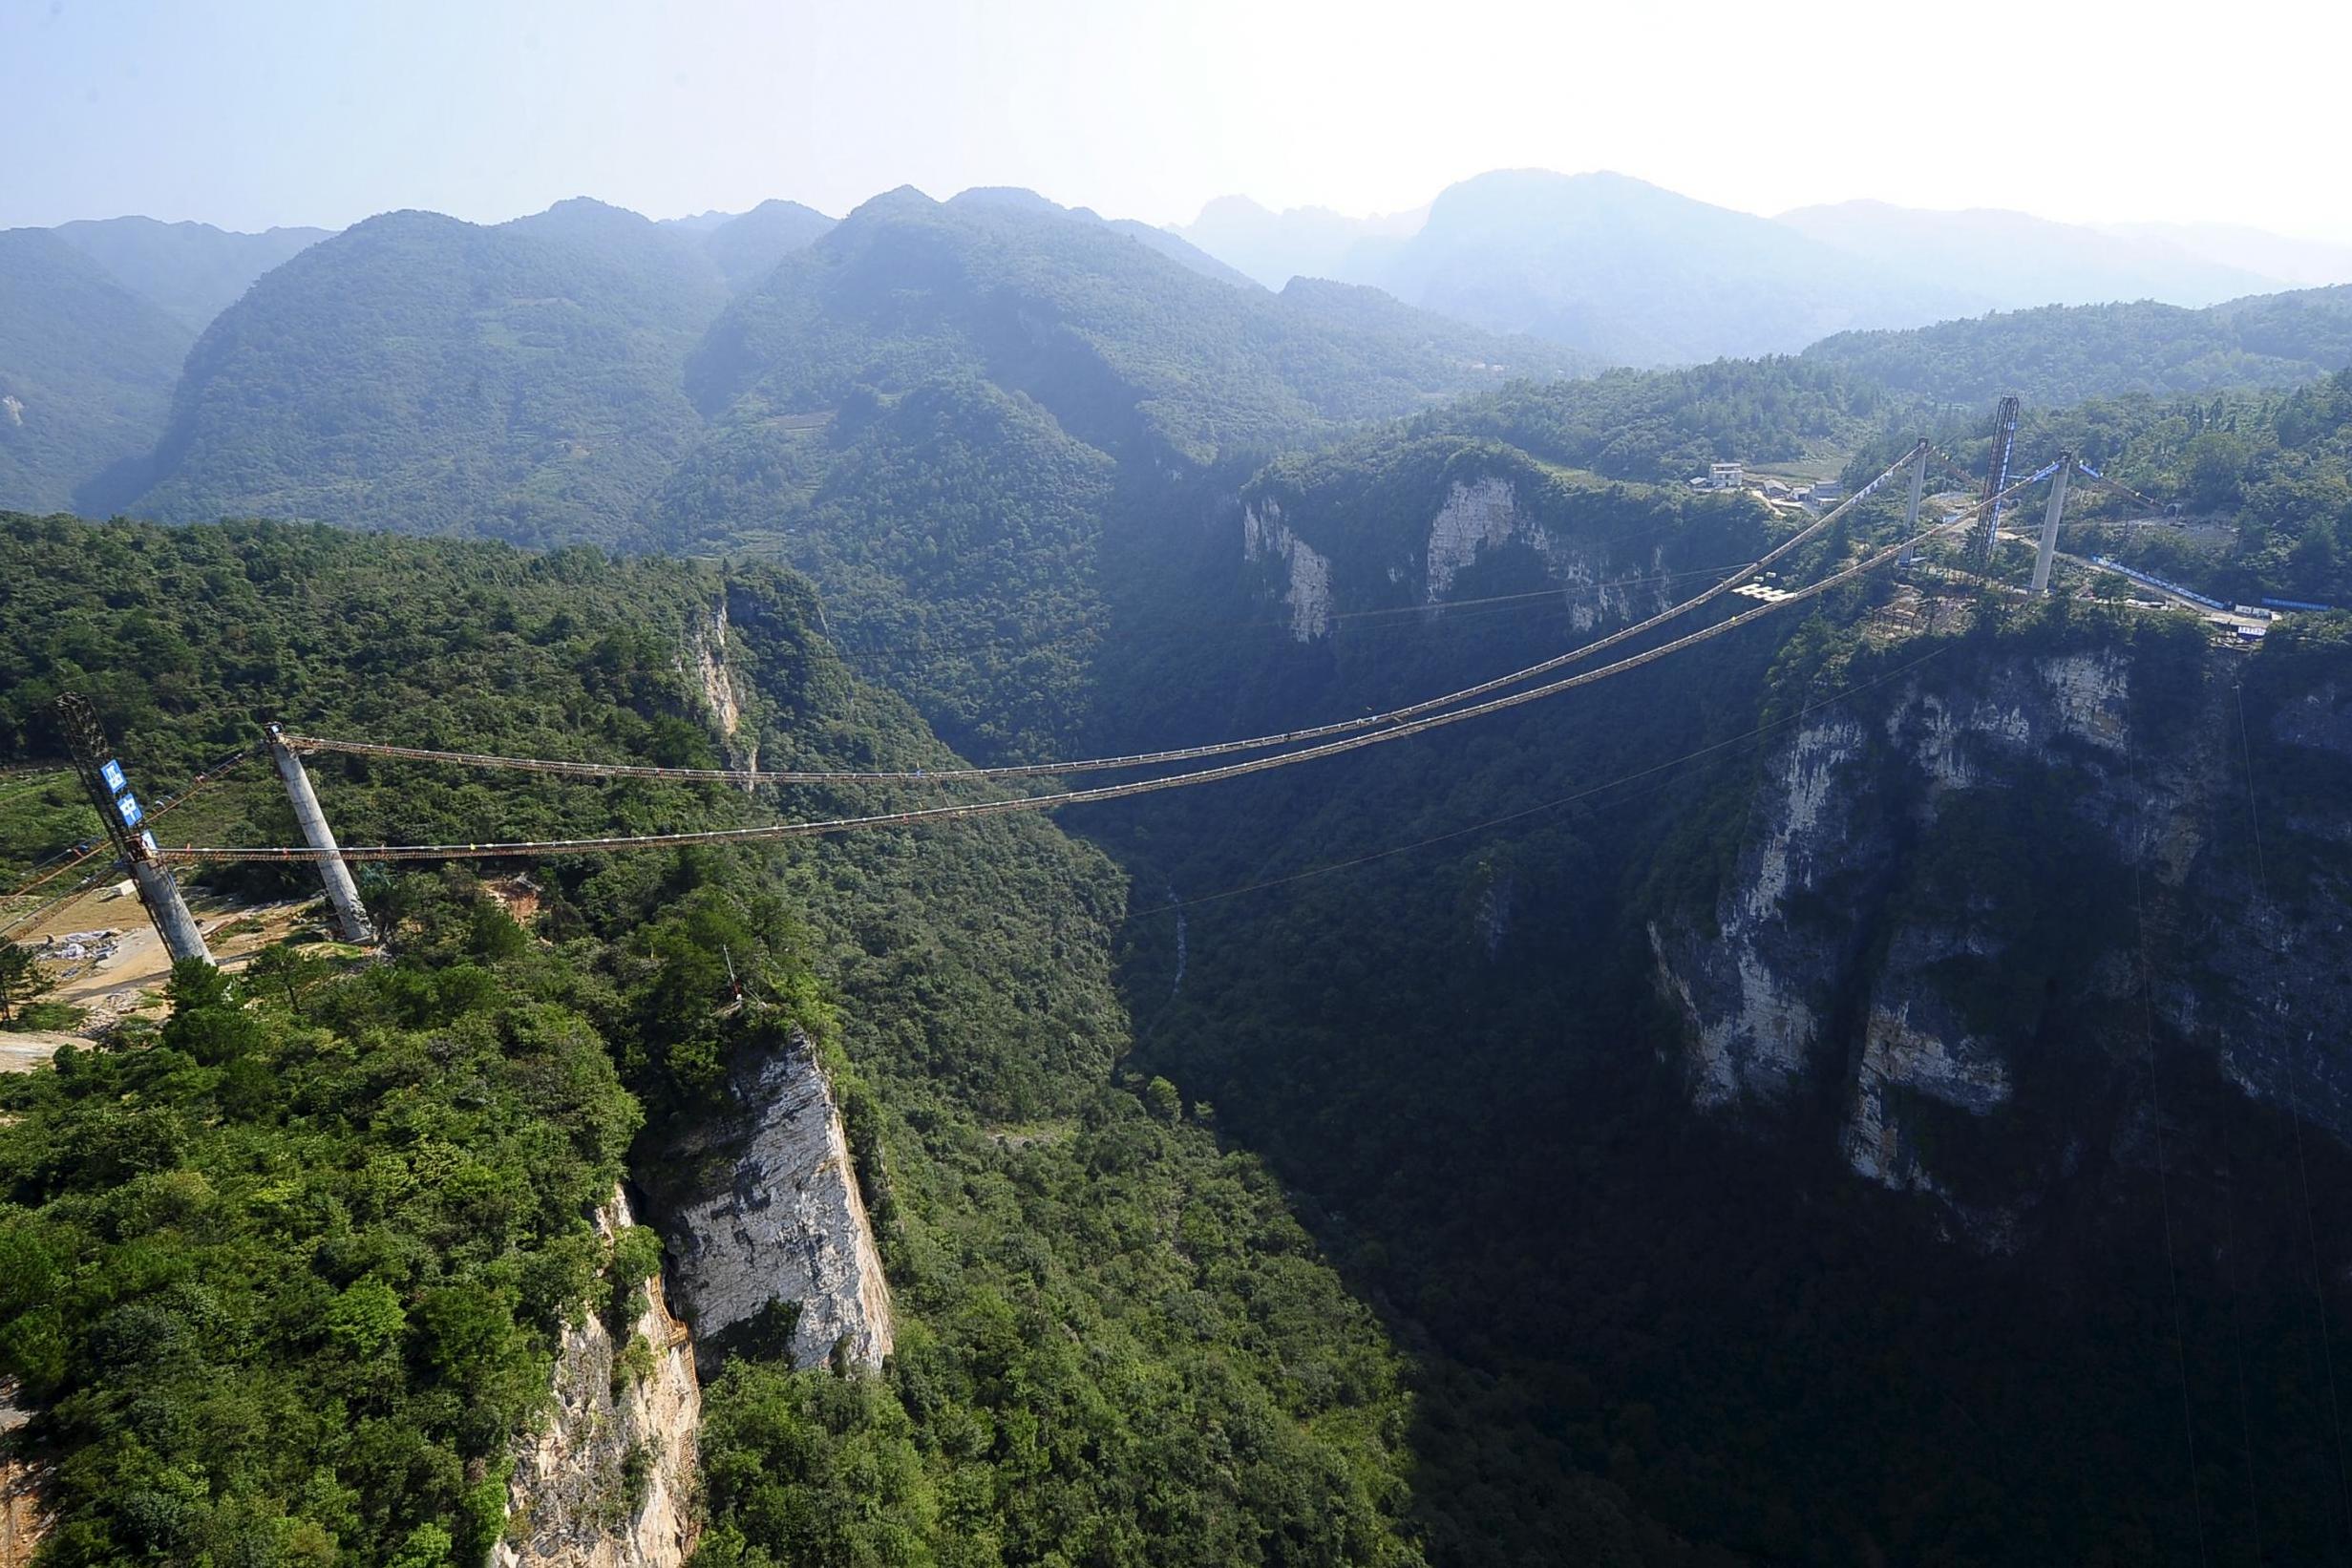 Tang Gongwei bought a train ticket to Zhangjiajie, a popular tourist spot in central China that many compare to the film Avatar